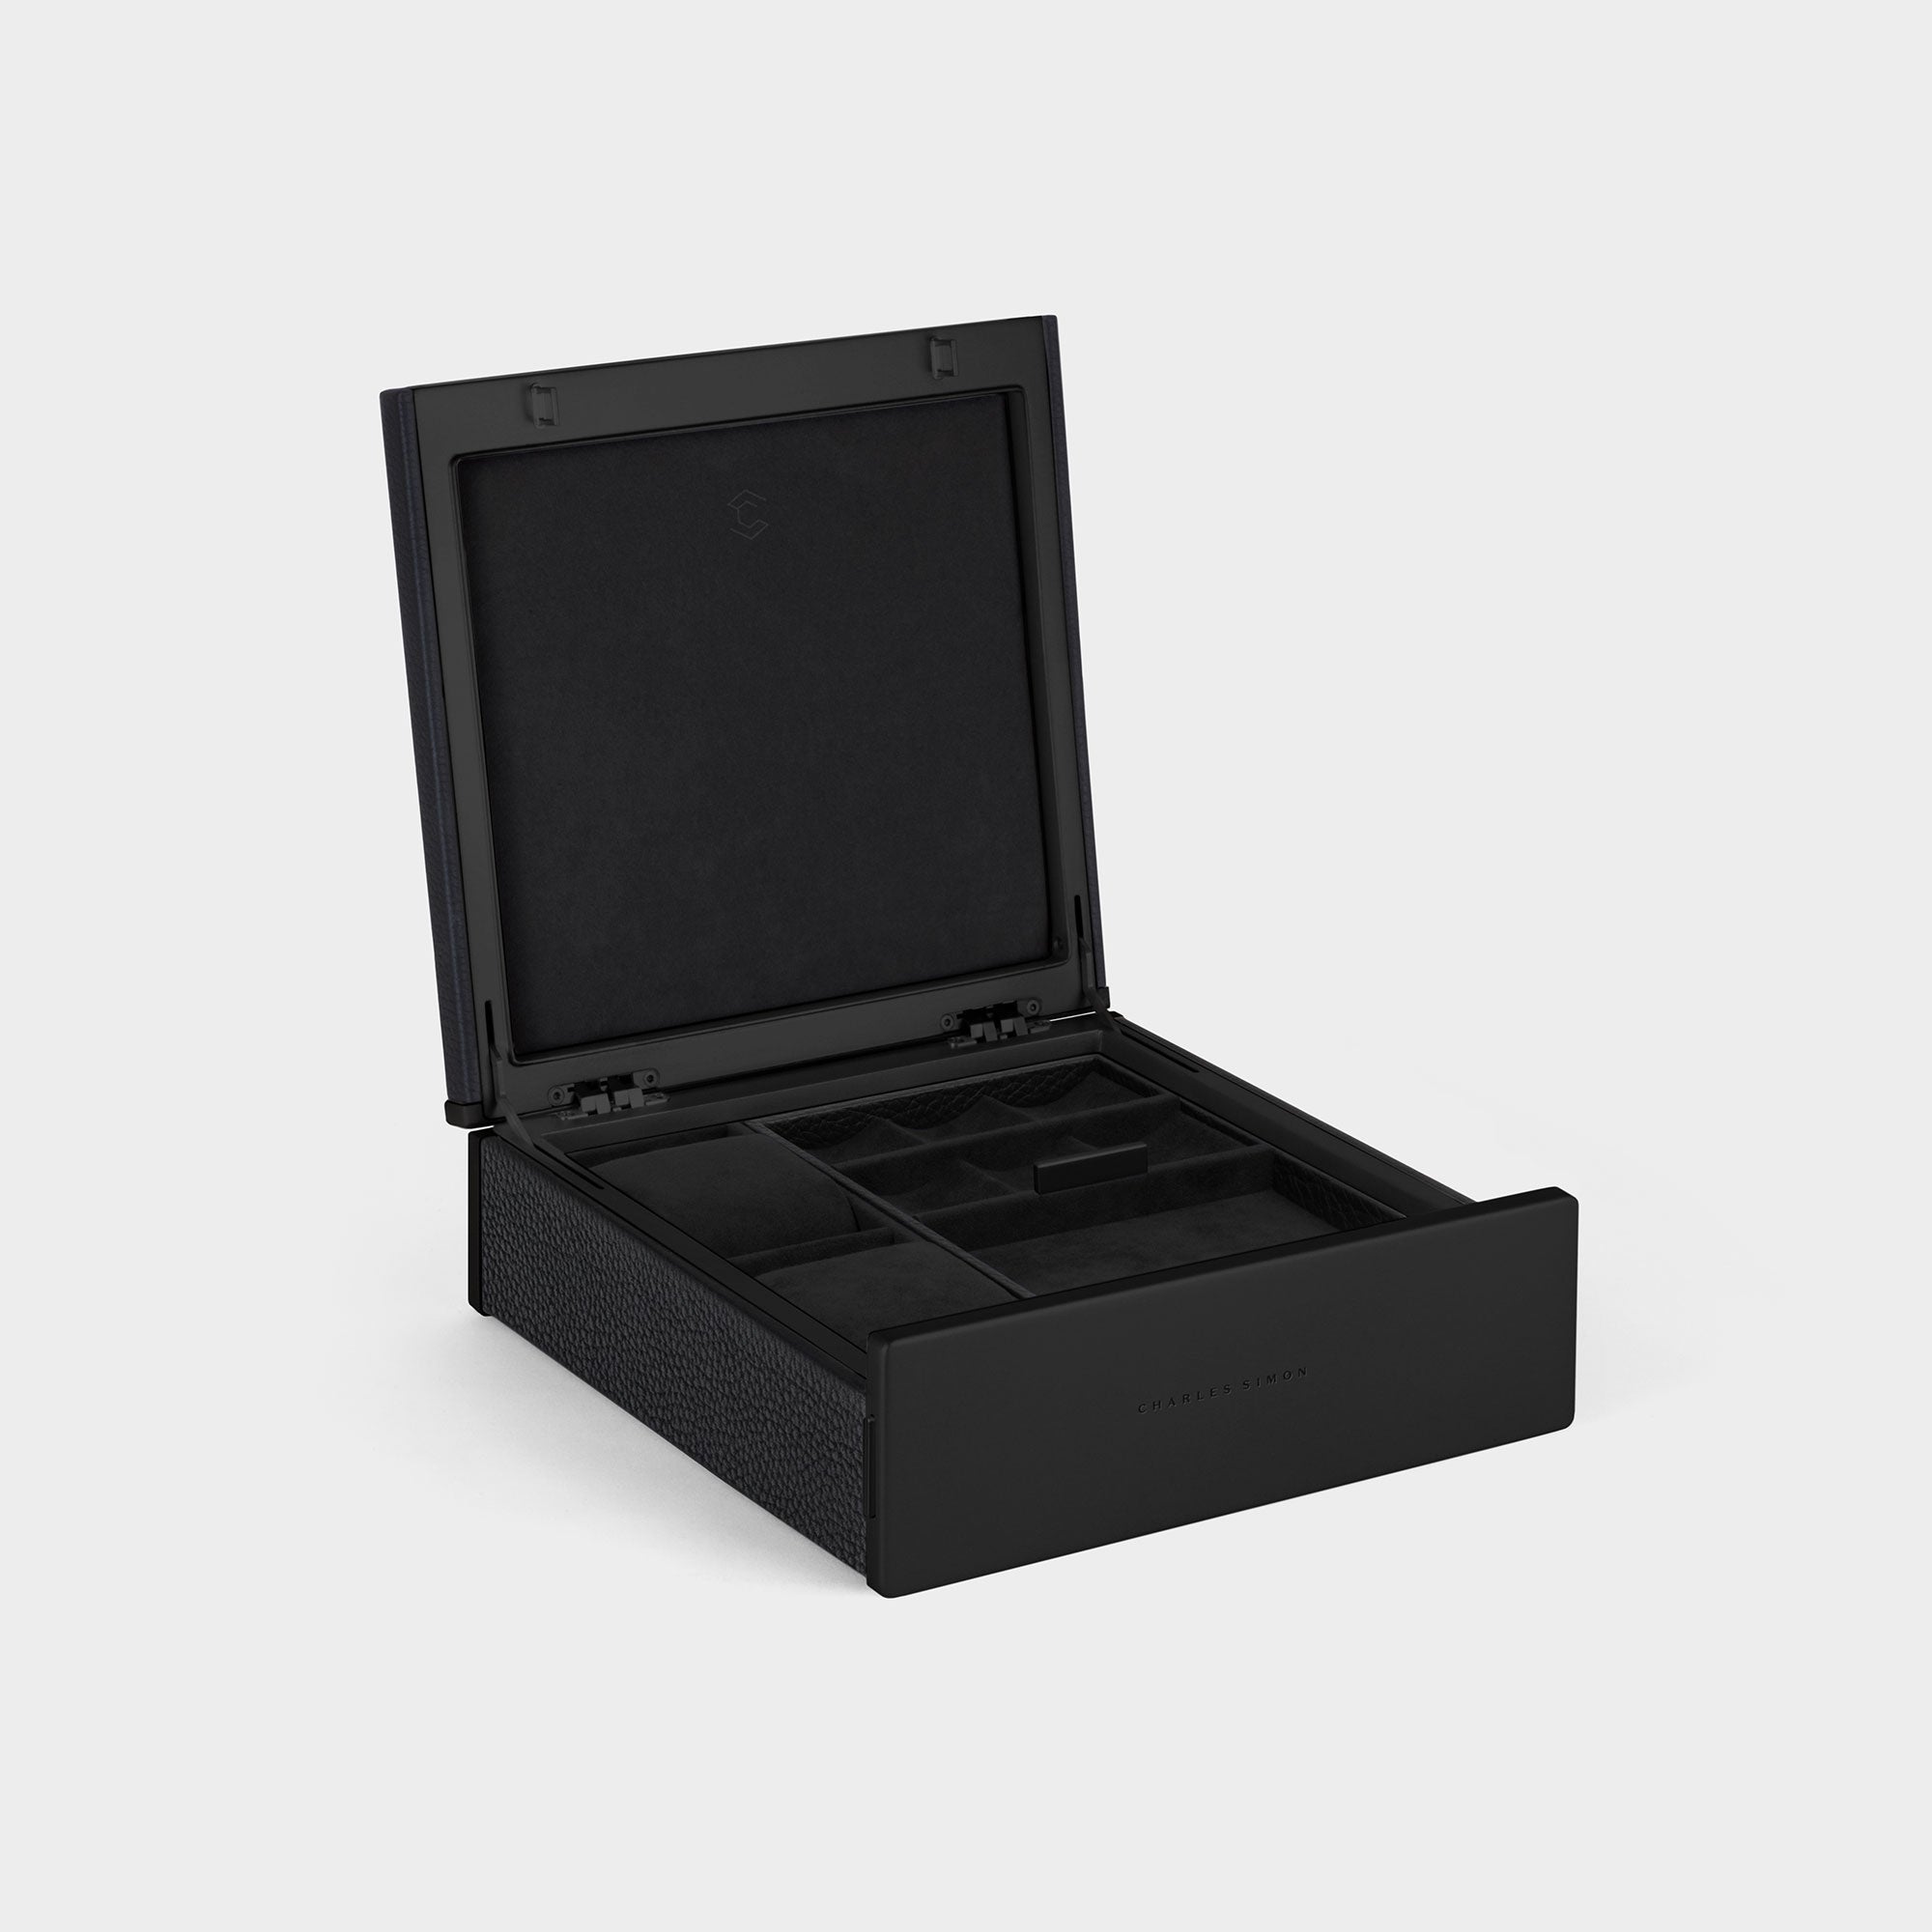 Product photo of all black Taylor 2 Watch and Jewelry box for practical watch storage and jewelry organization. Accomodates rings, necklaces, jewelry, earrings and up to 2 watches